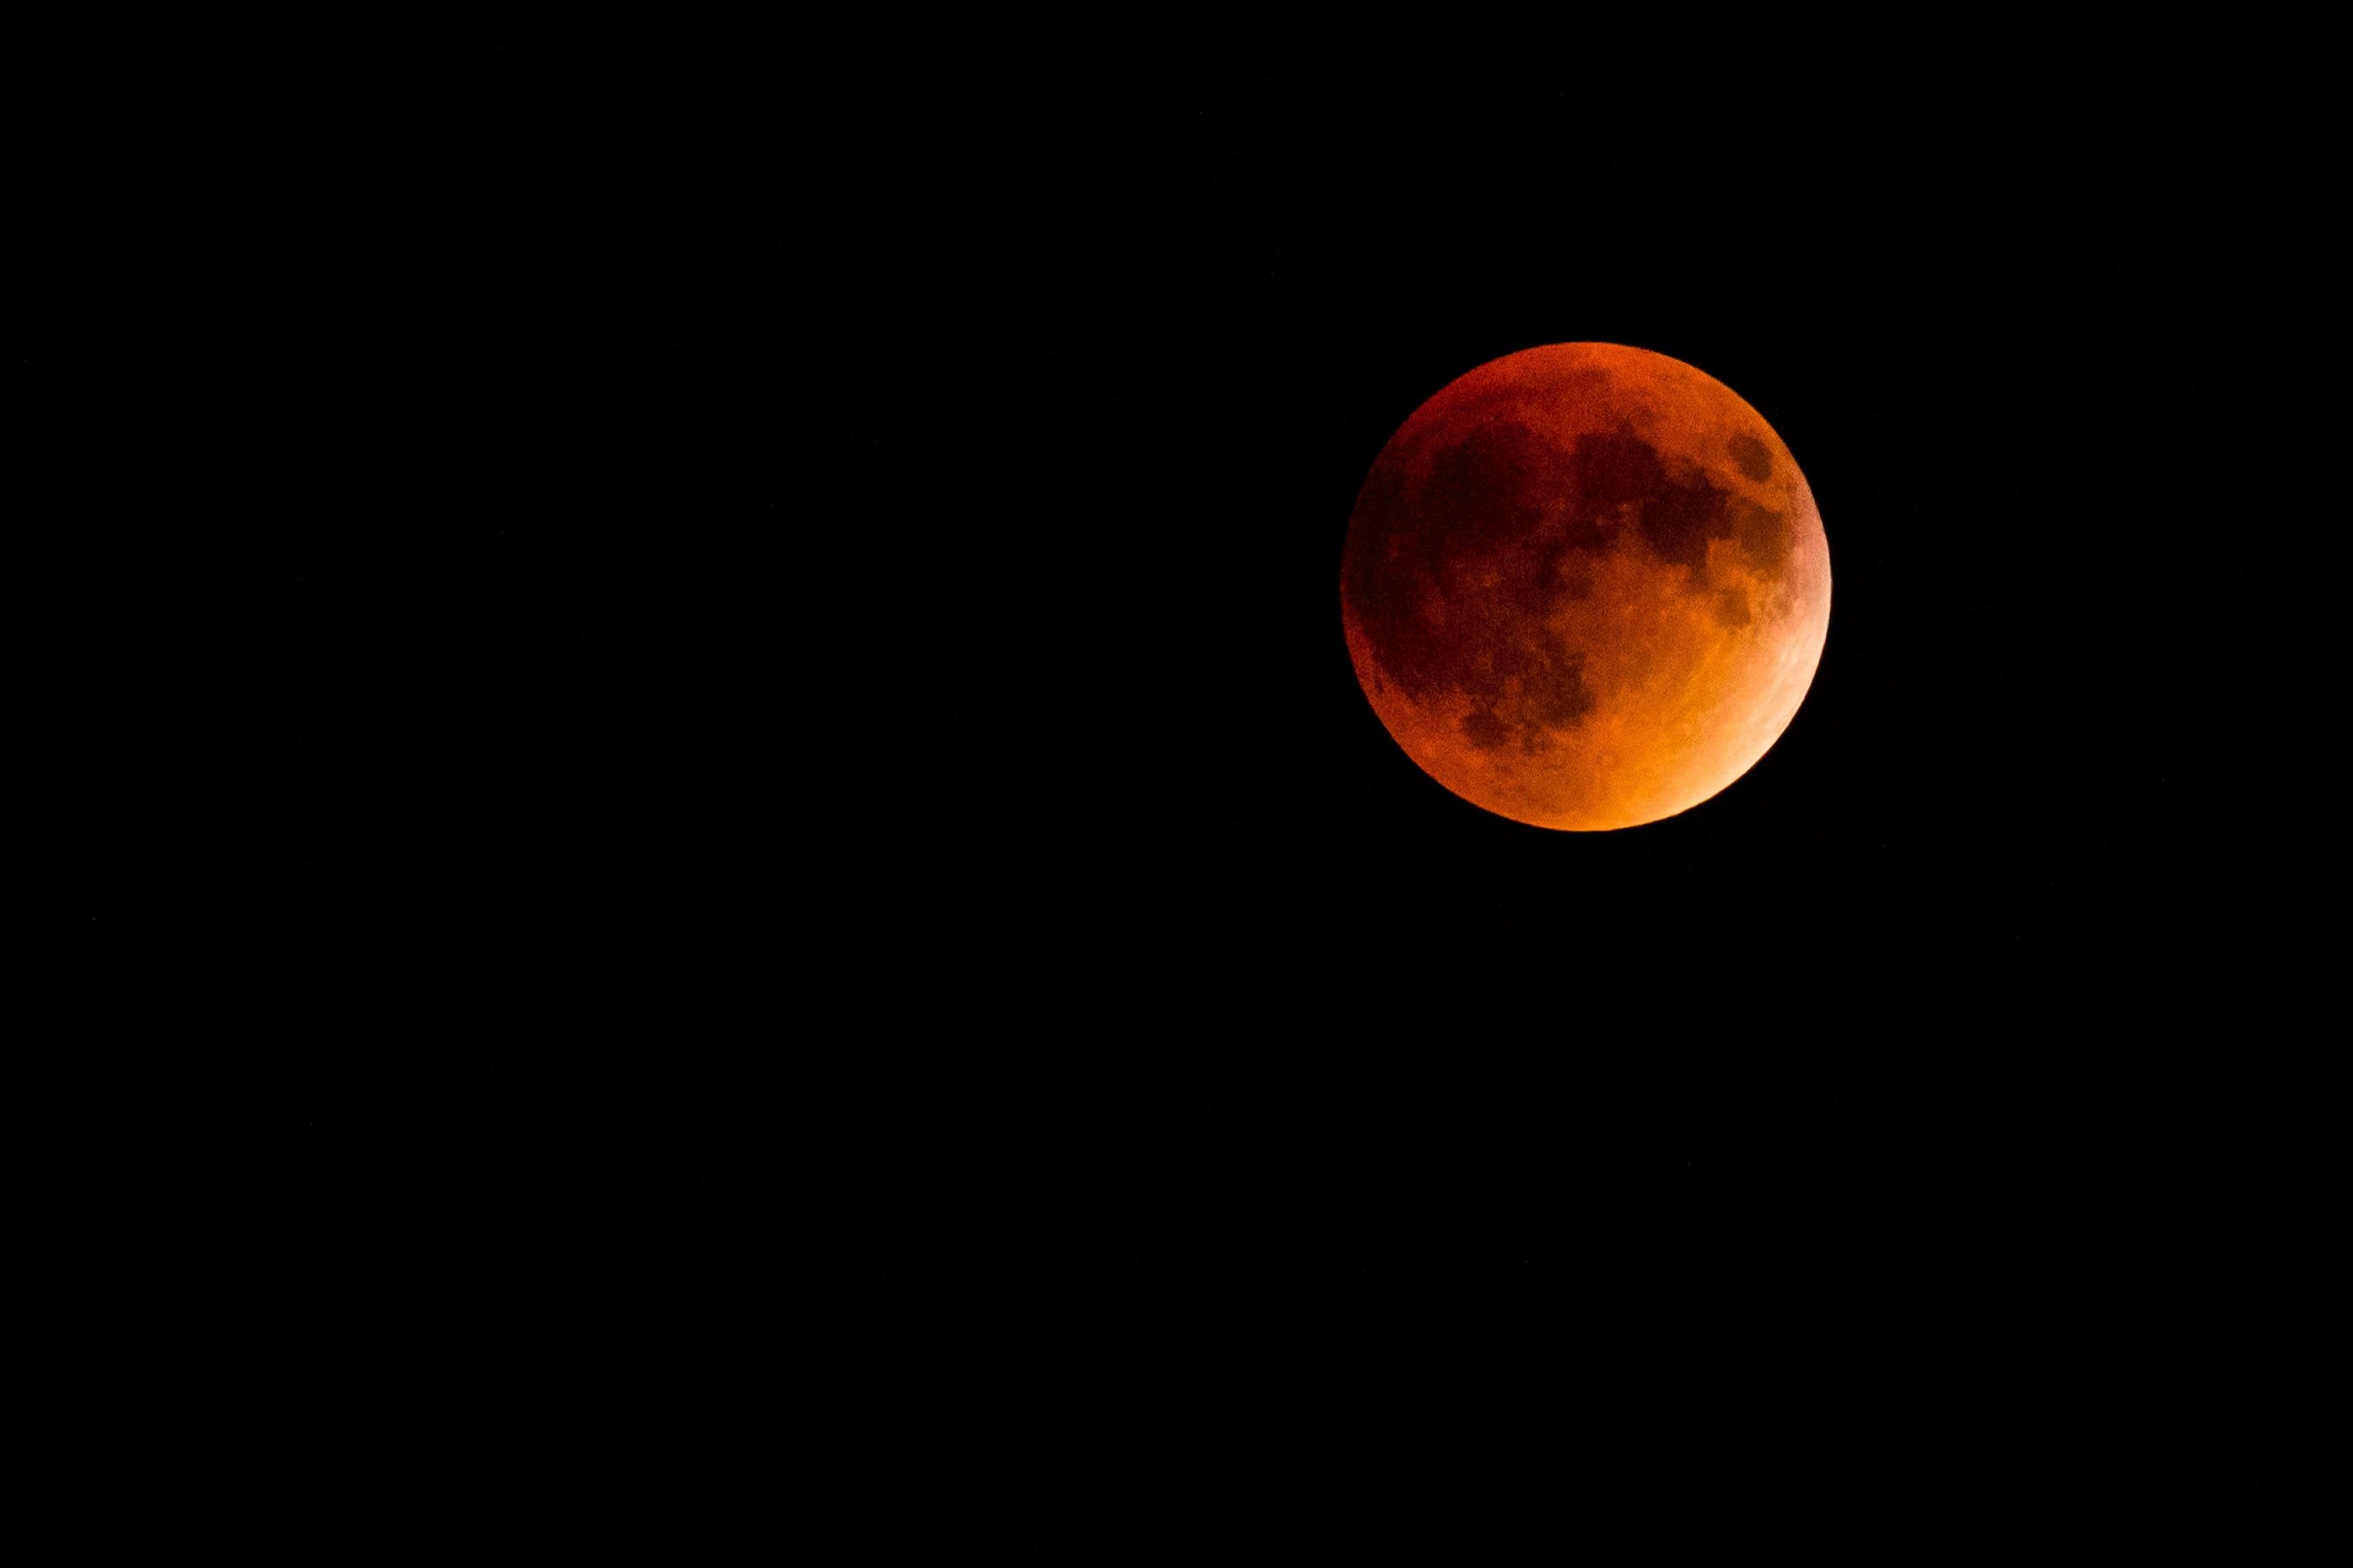 What exposure was used for successful picture of the blood moon? Stack Exchange